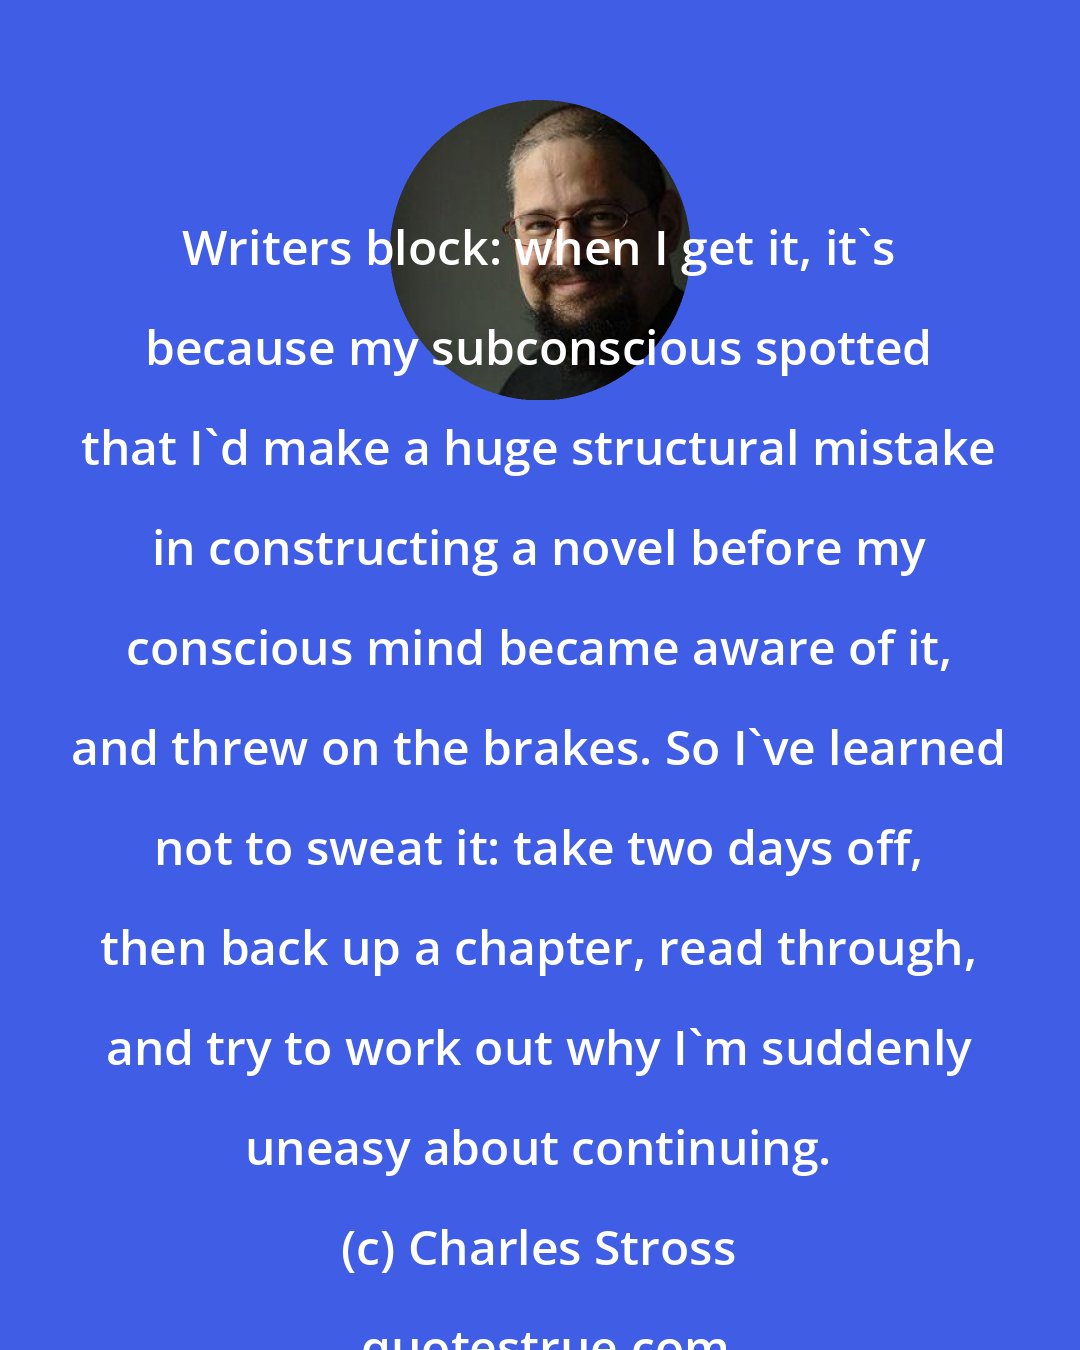 Charles Stross: Writers block: when I get it, it's because my subconscious spotted that I'd make a huge structural mistake in constructing a novel before my conscious mind became aware of it, and threw on the brakes. So I've learned not to sweat it: take two days off, then back up a chapter, read through, and try to work out why I'm suddenly uneasy about continuing.